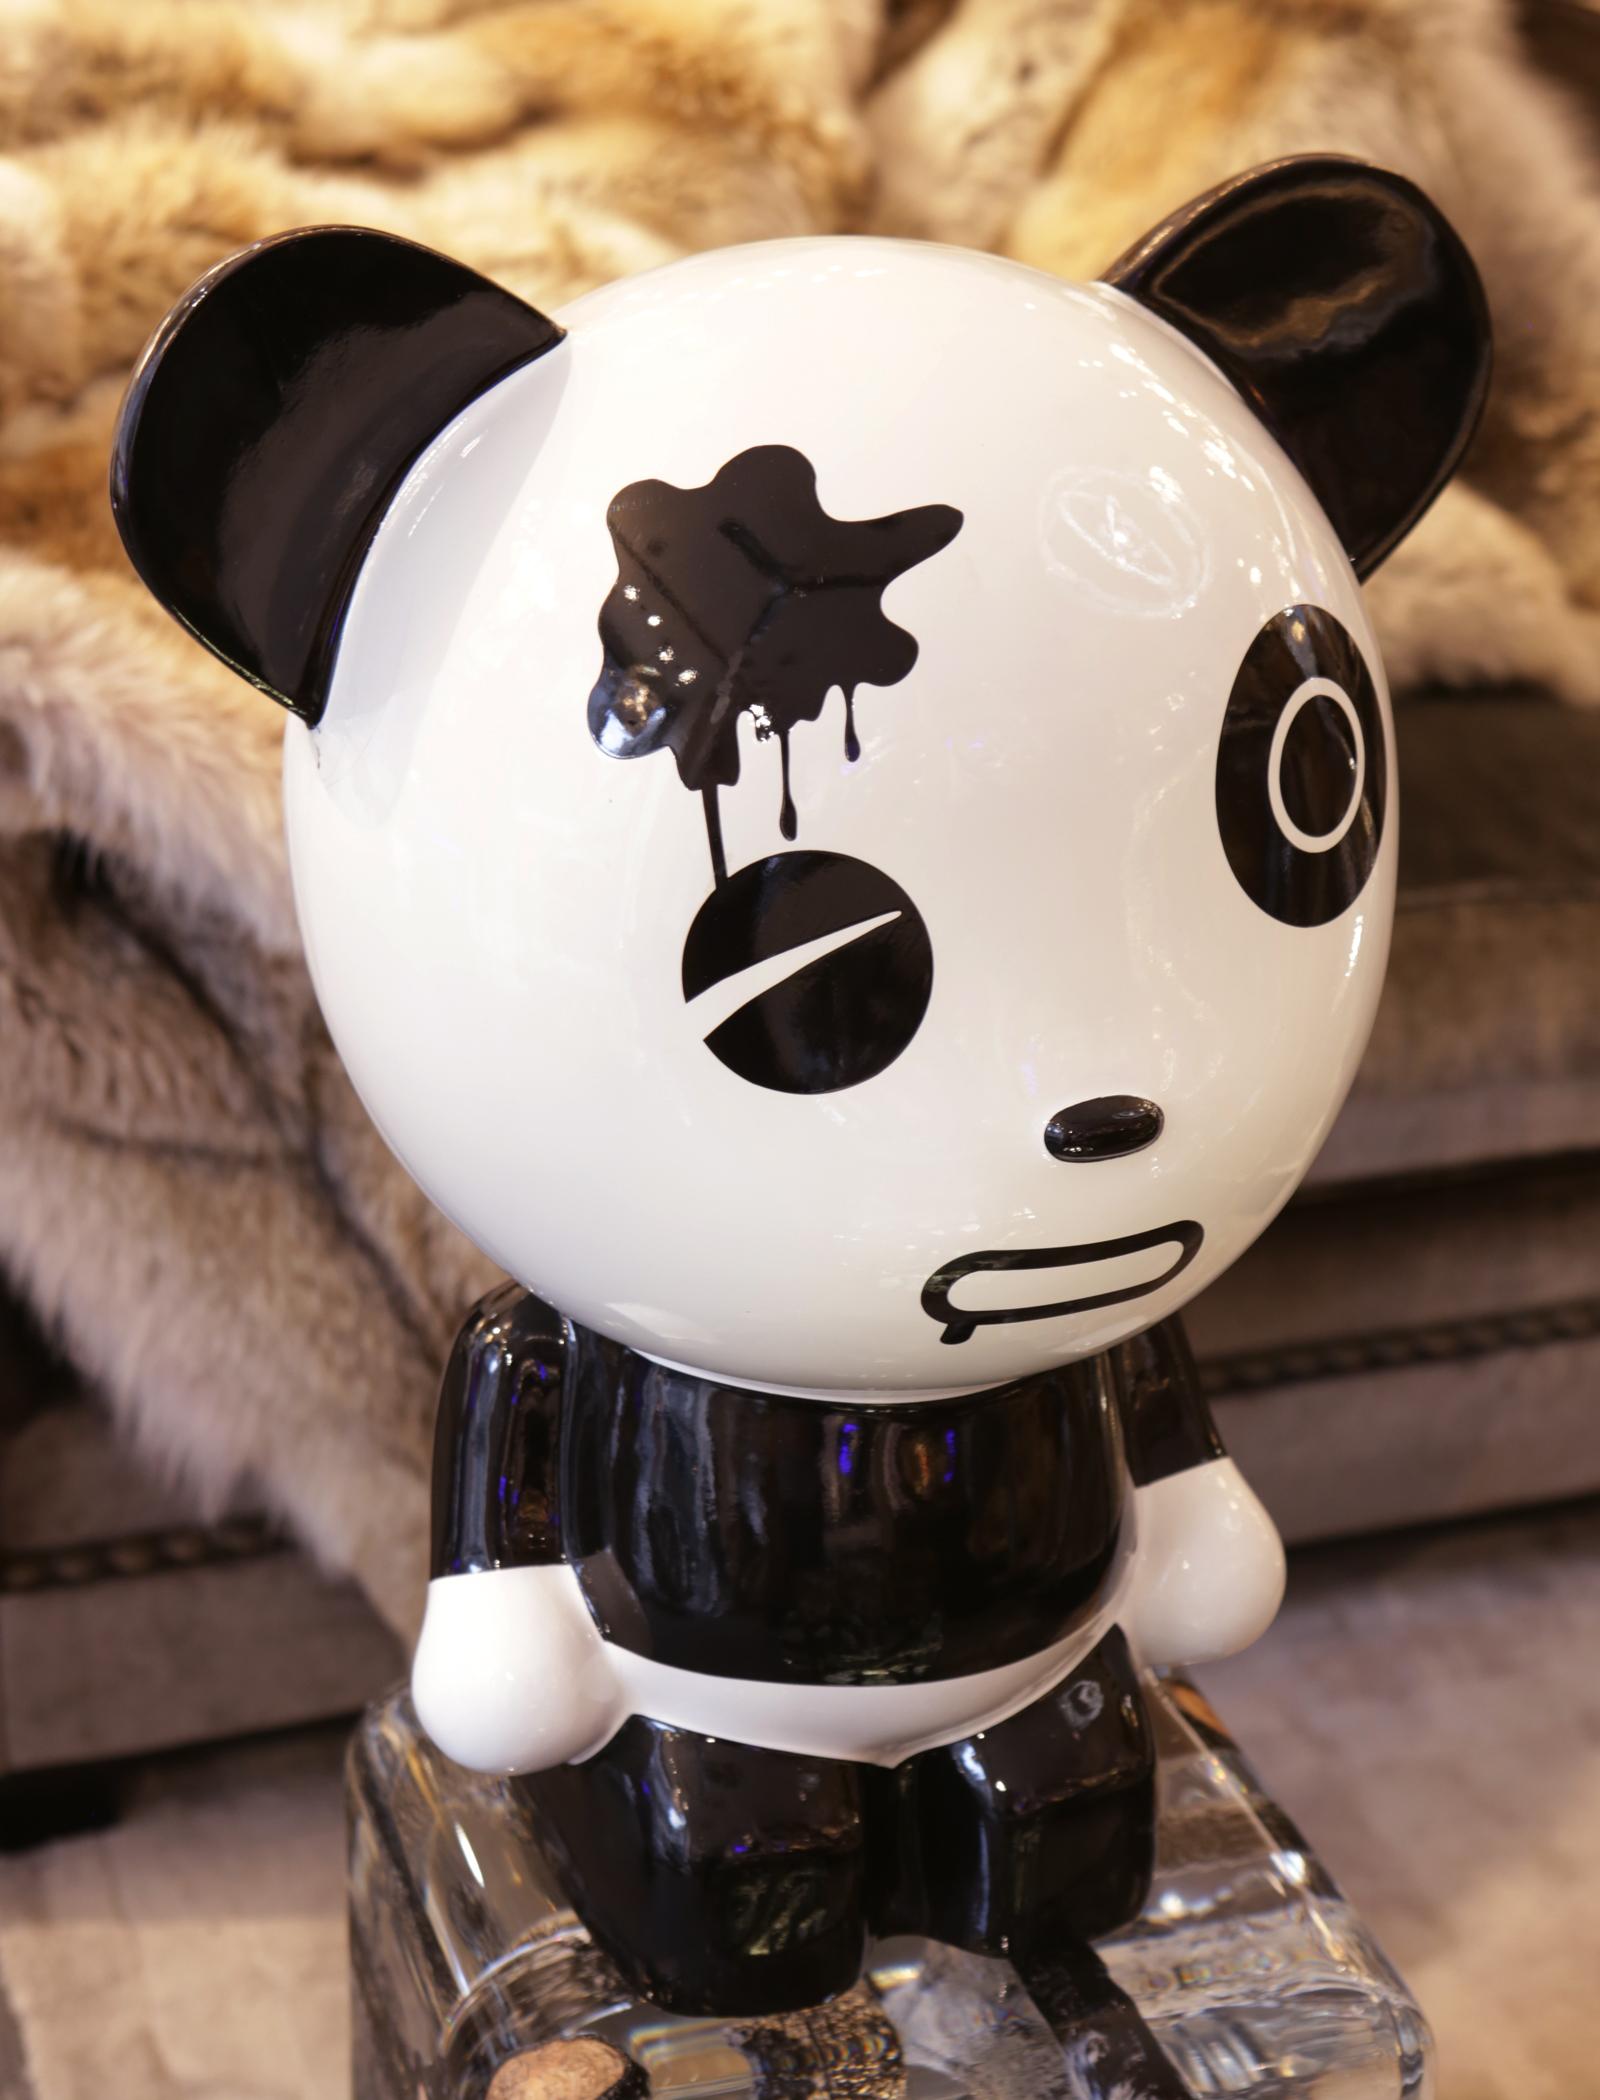 Chinese Wounded Panda Sculpture by Jiji